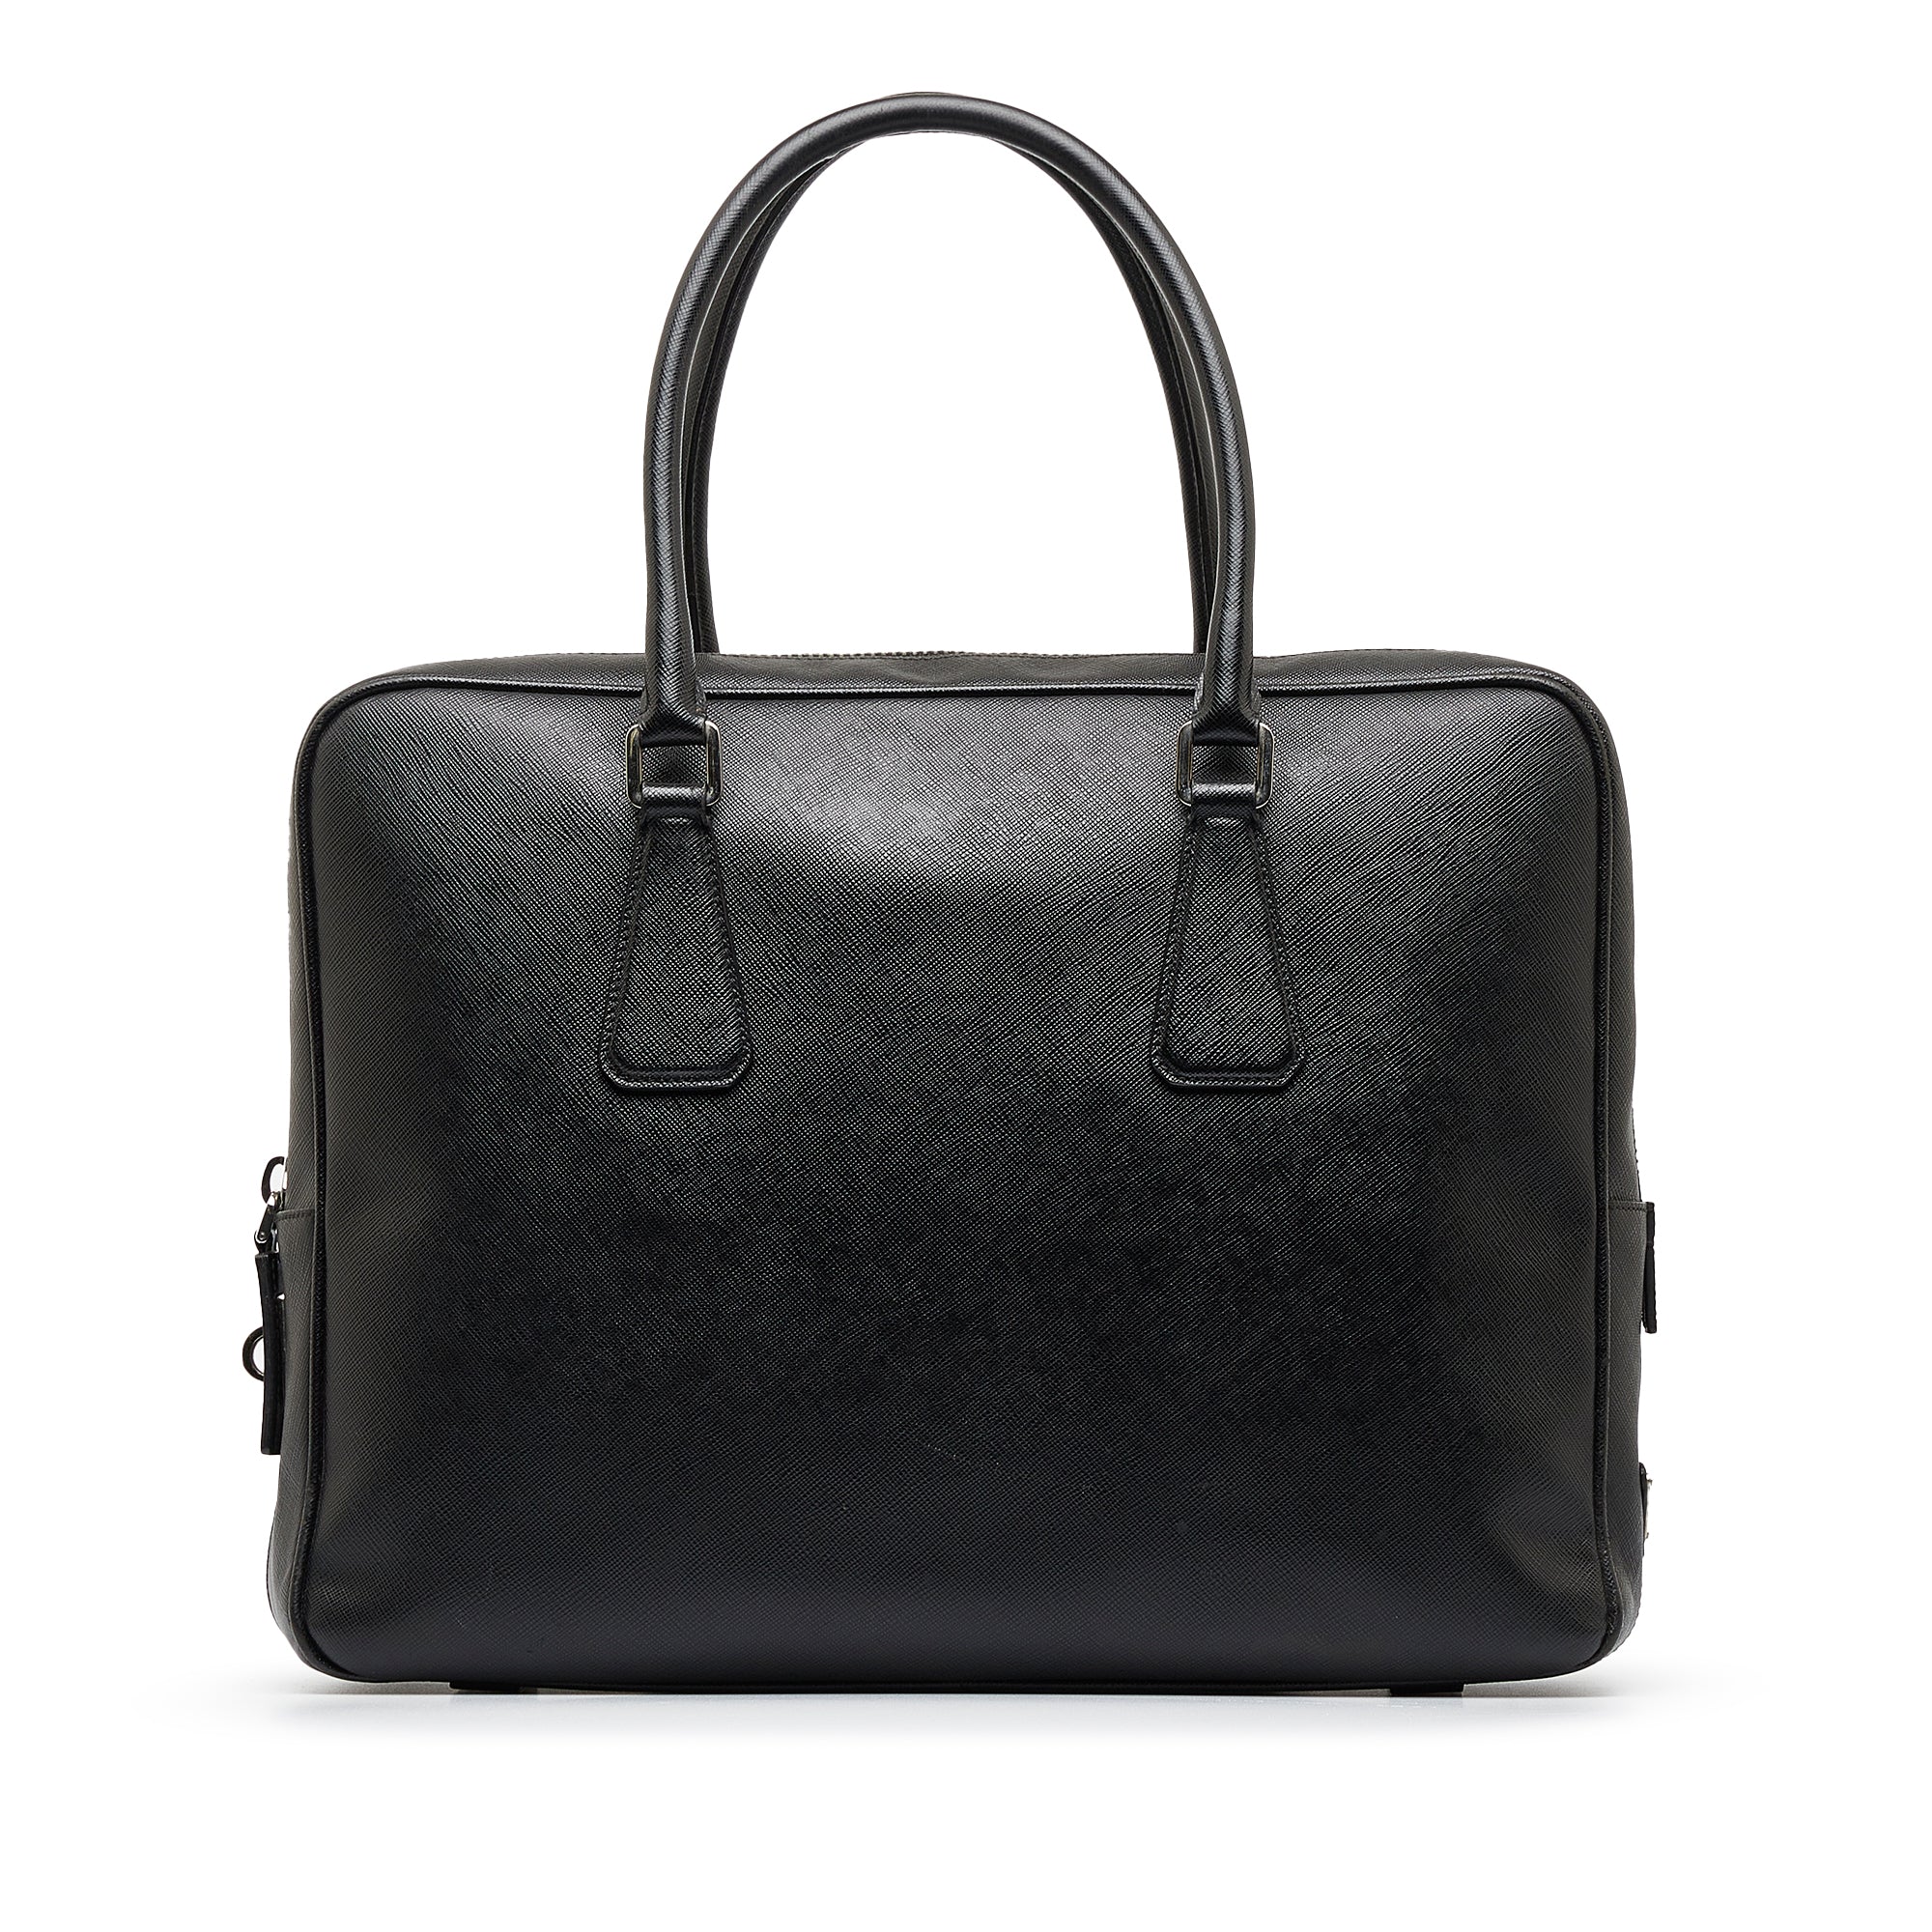 Prada - Authenticated Bag - Leather Black Plain for Men, Very Good Condition